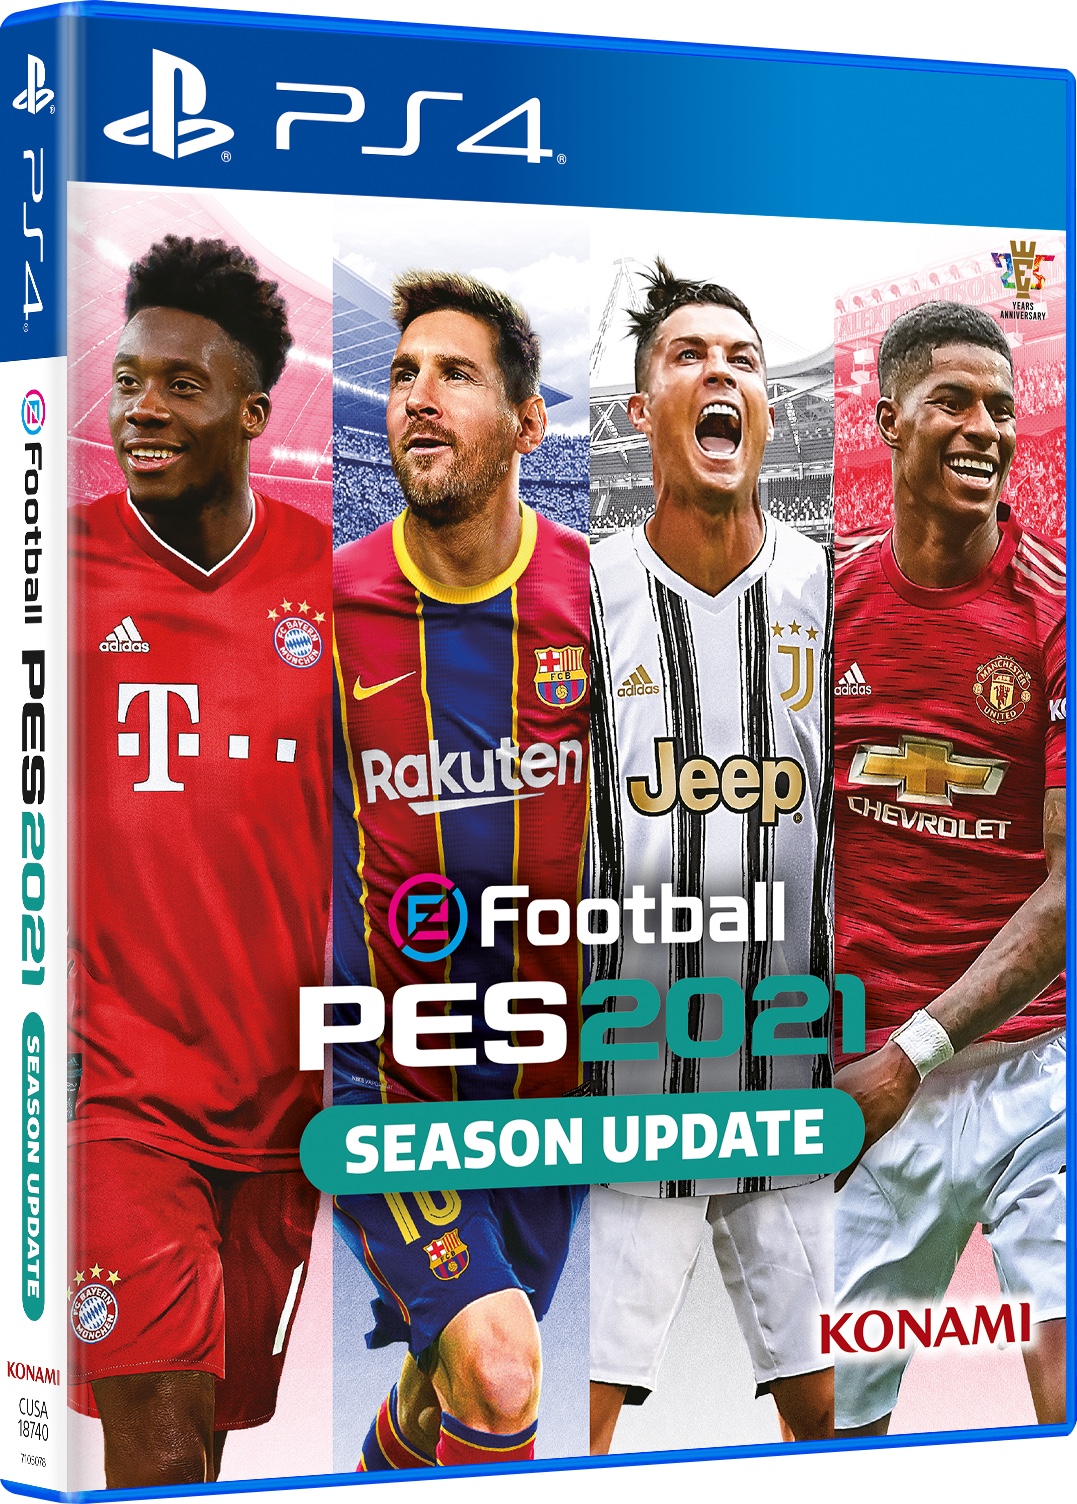 eFootball on Twitter: else loves the Cover Art we revealed this 😍 Check out the official pack shots #eFootballPES2021 on PS4, Xbox One and Steam! 📸🔥 https://t.co/rPy60nInJP" / Twitter